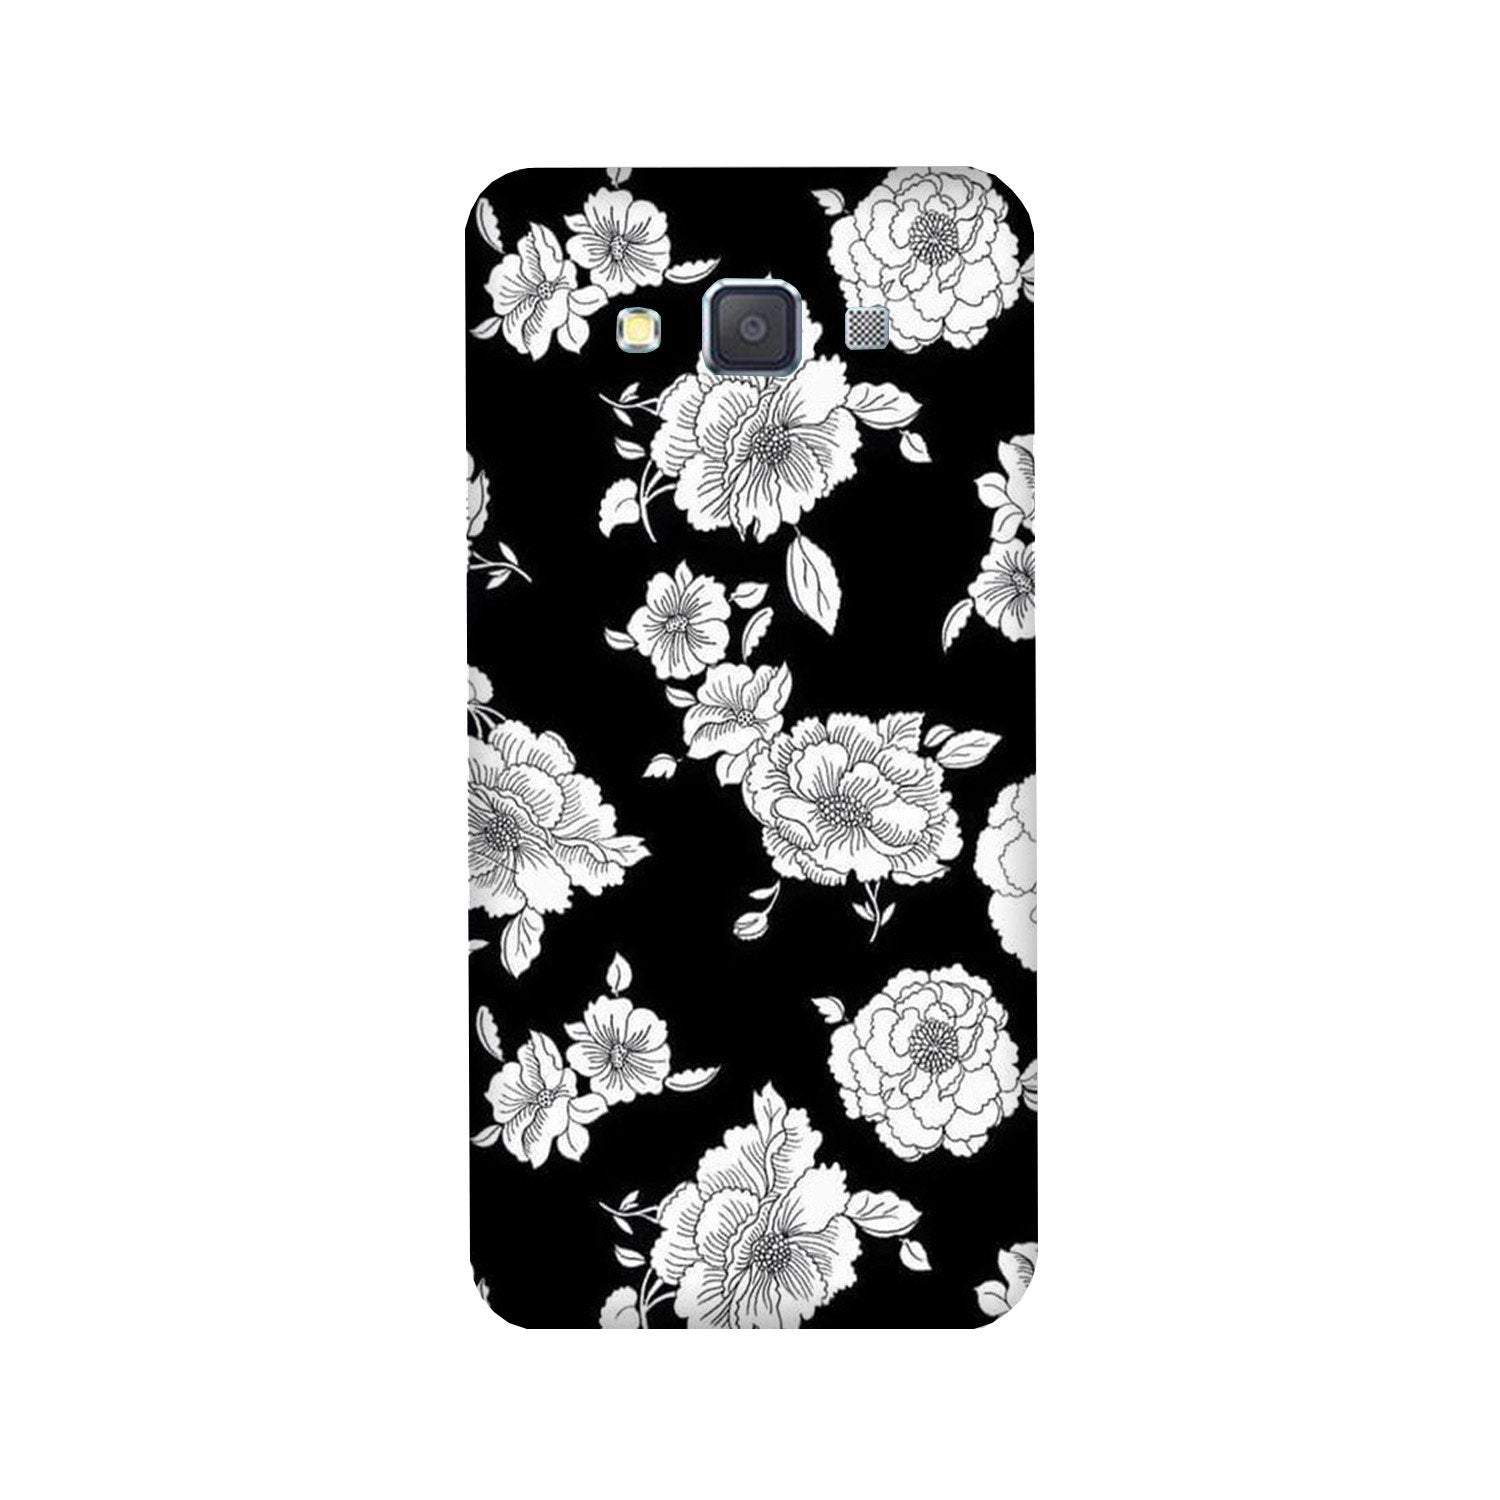 White flowers Black Background Case for Galaxy J7 (2016)